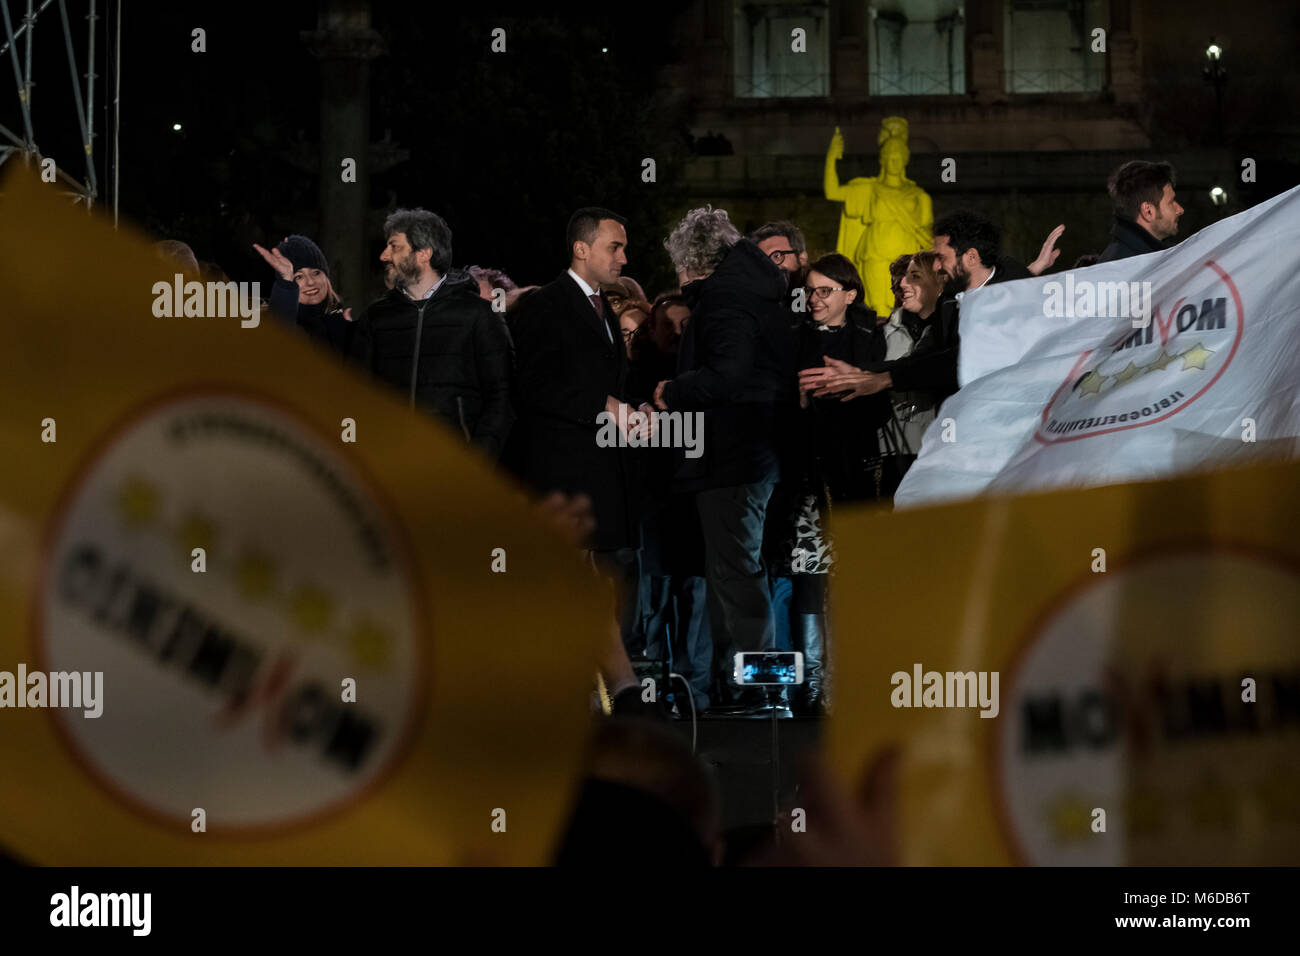 Rome, Italy. 02 Mar 2018. Populist party 5-Star Movement hold its final electoral rally in Piazza del Popolo. On the stage, there was a long speech by Luigi di Maio, the 31 year old candidate Premier and the would-be cabinet team. To support their candidature also there were the parliamentarian Paola Taverna, the deputy Roberto Fico and Roberta Lombardi, candidate for the Presidency of Lazio Region. Also among the guest on the stage figured Beppe Grillo, the Italian comedian who is the founder of the movement, and Alessandro Di Battista, called “the warrior” by 5-Star Movements’ supporters. Cr Stock Photo